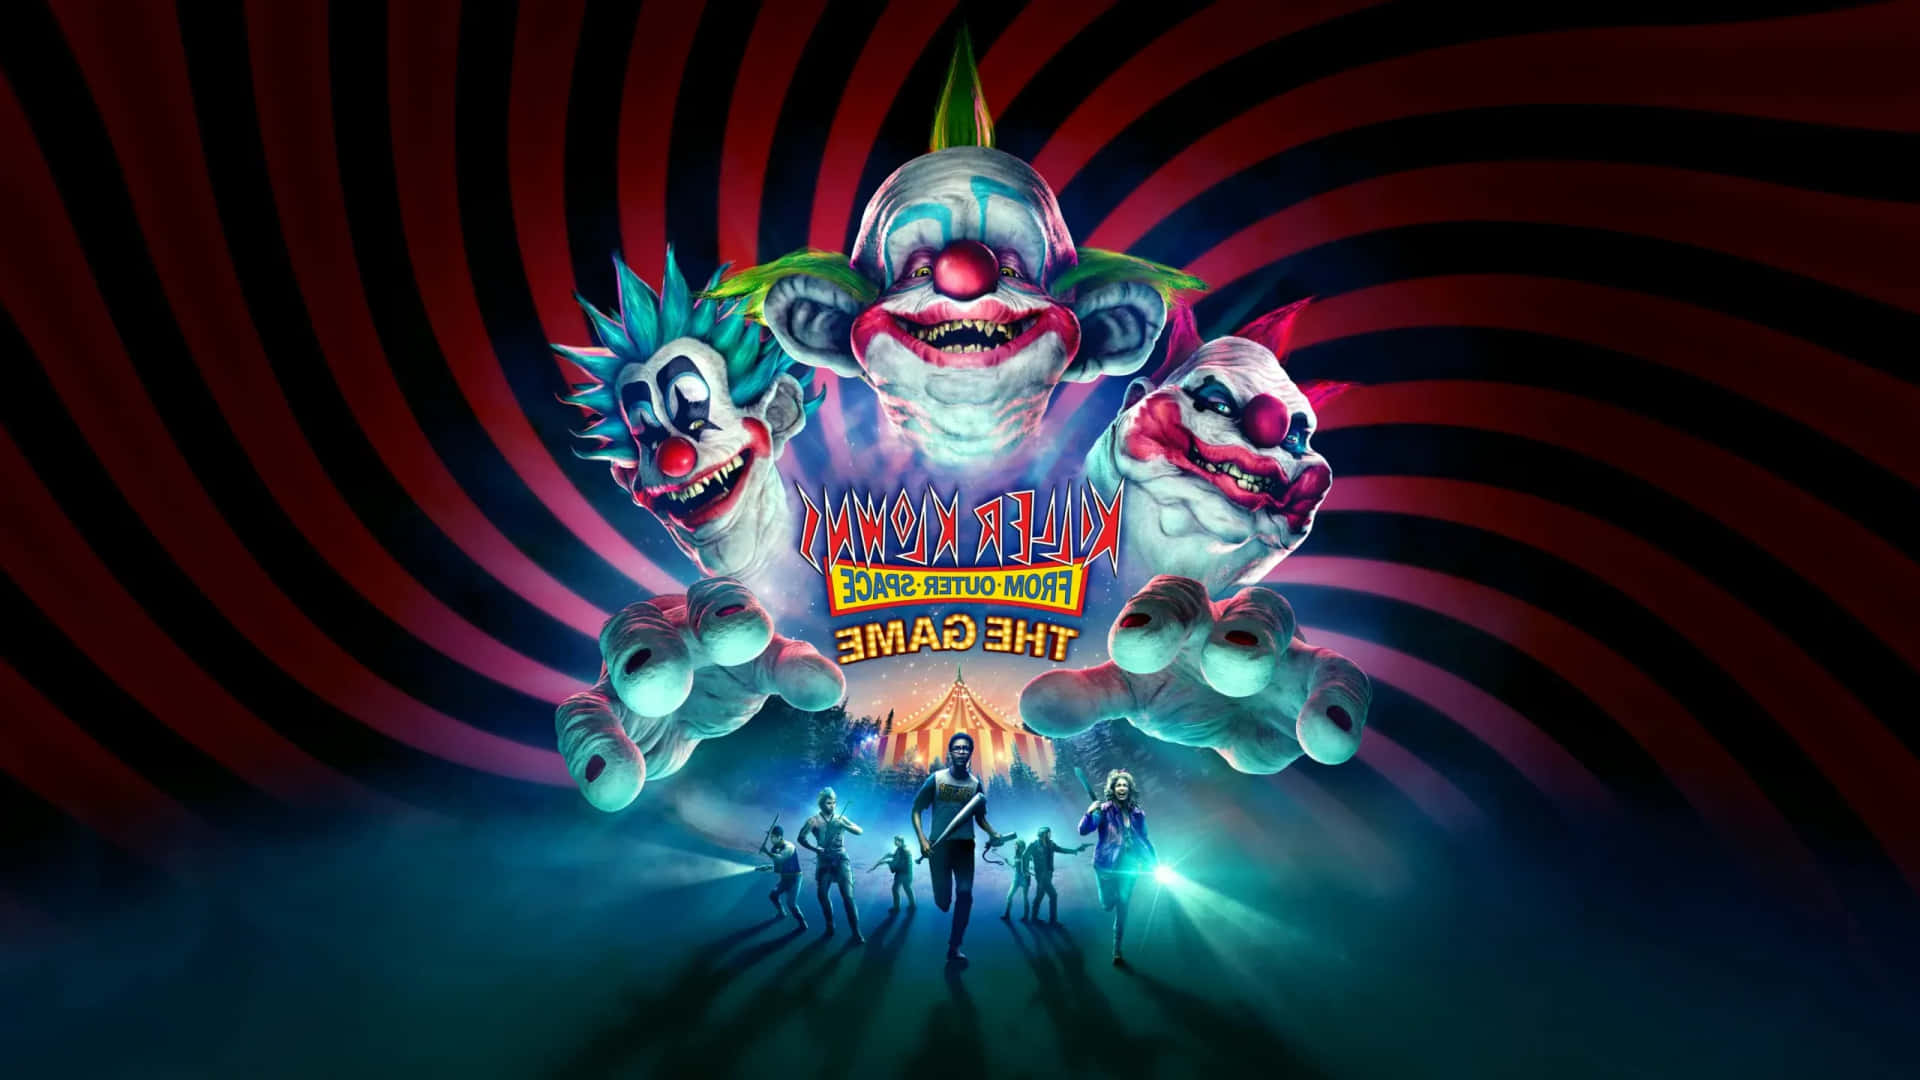 Aggregate more than 68 killer klowns from outer space wallpaper best